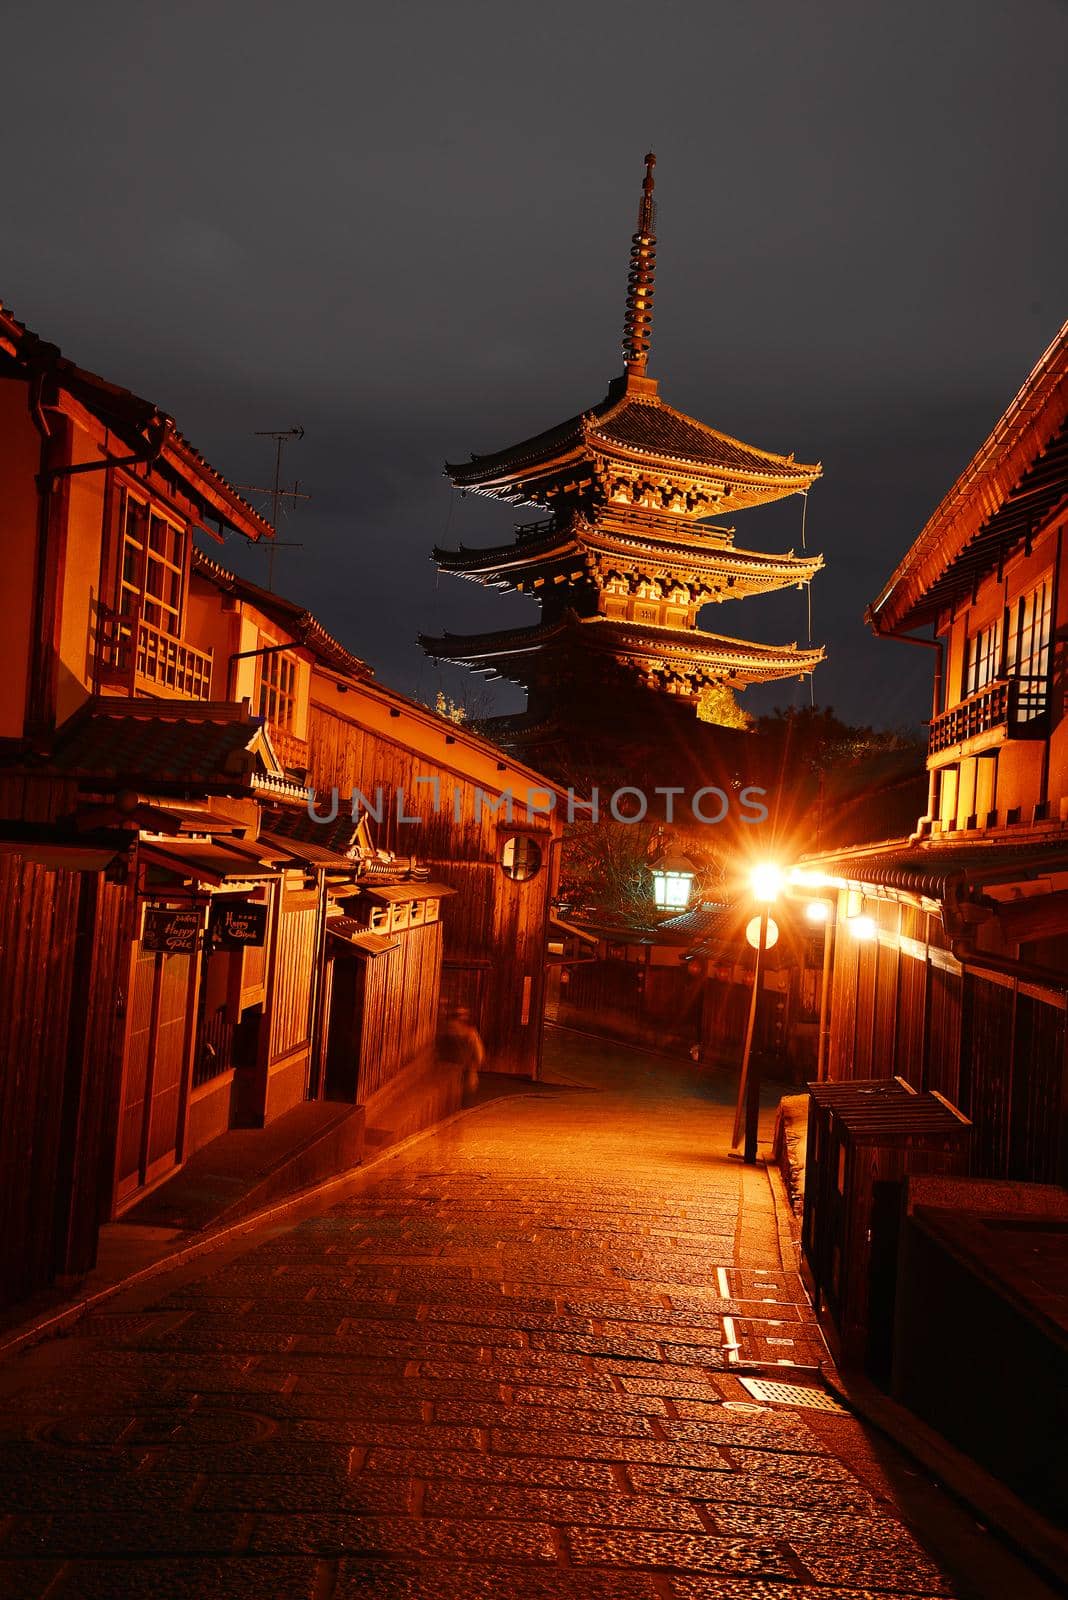 kyoto old town by porbital